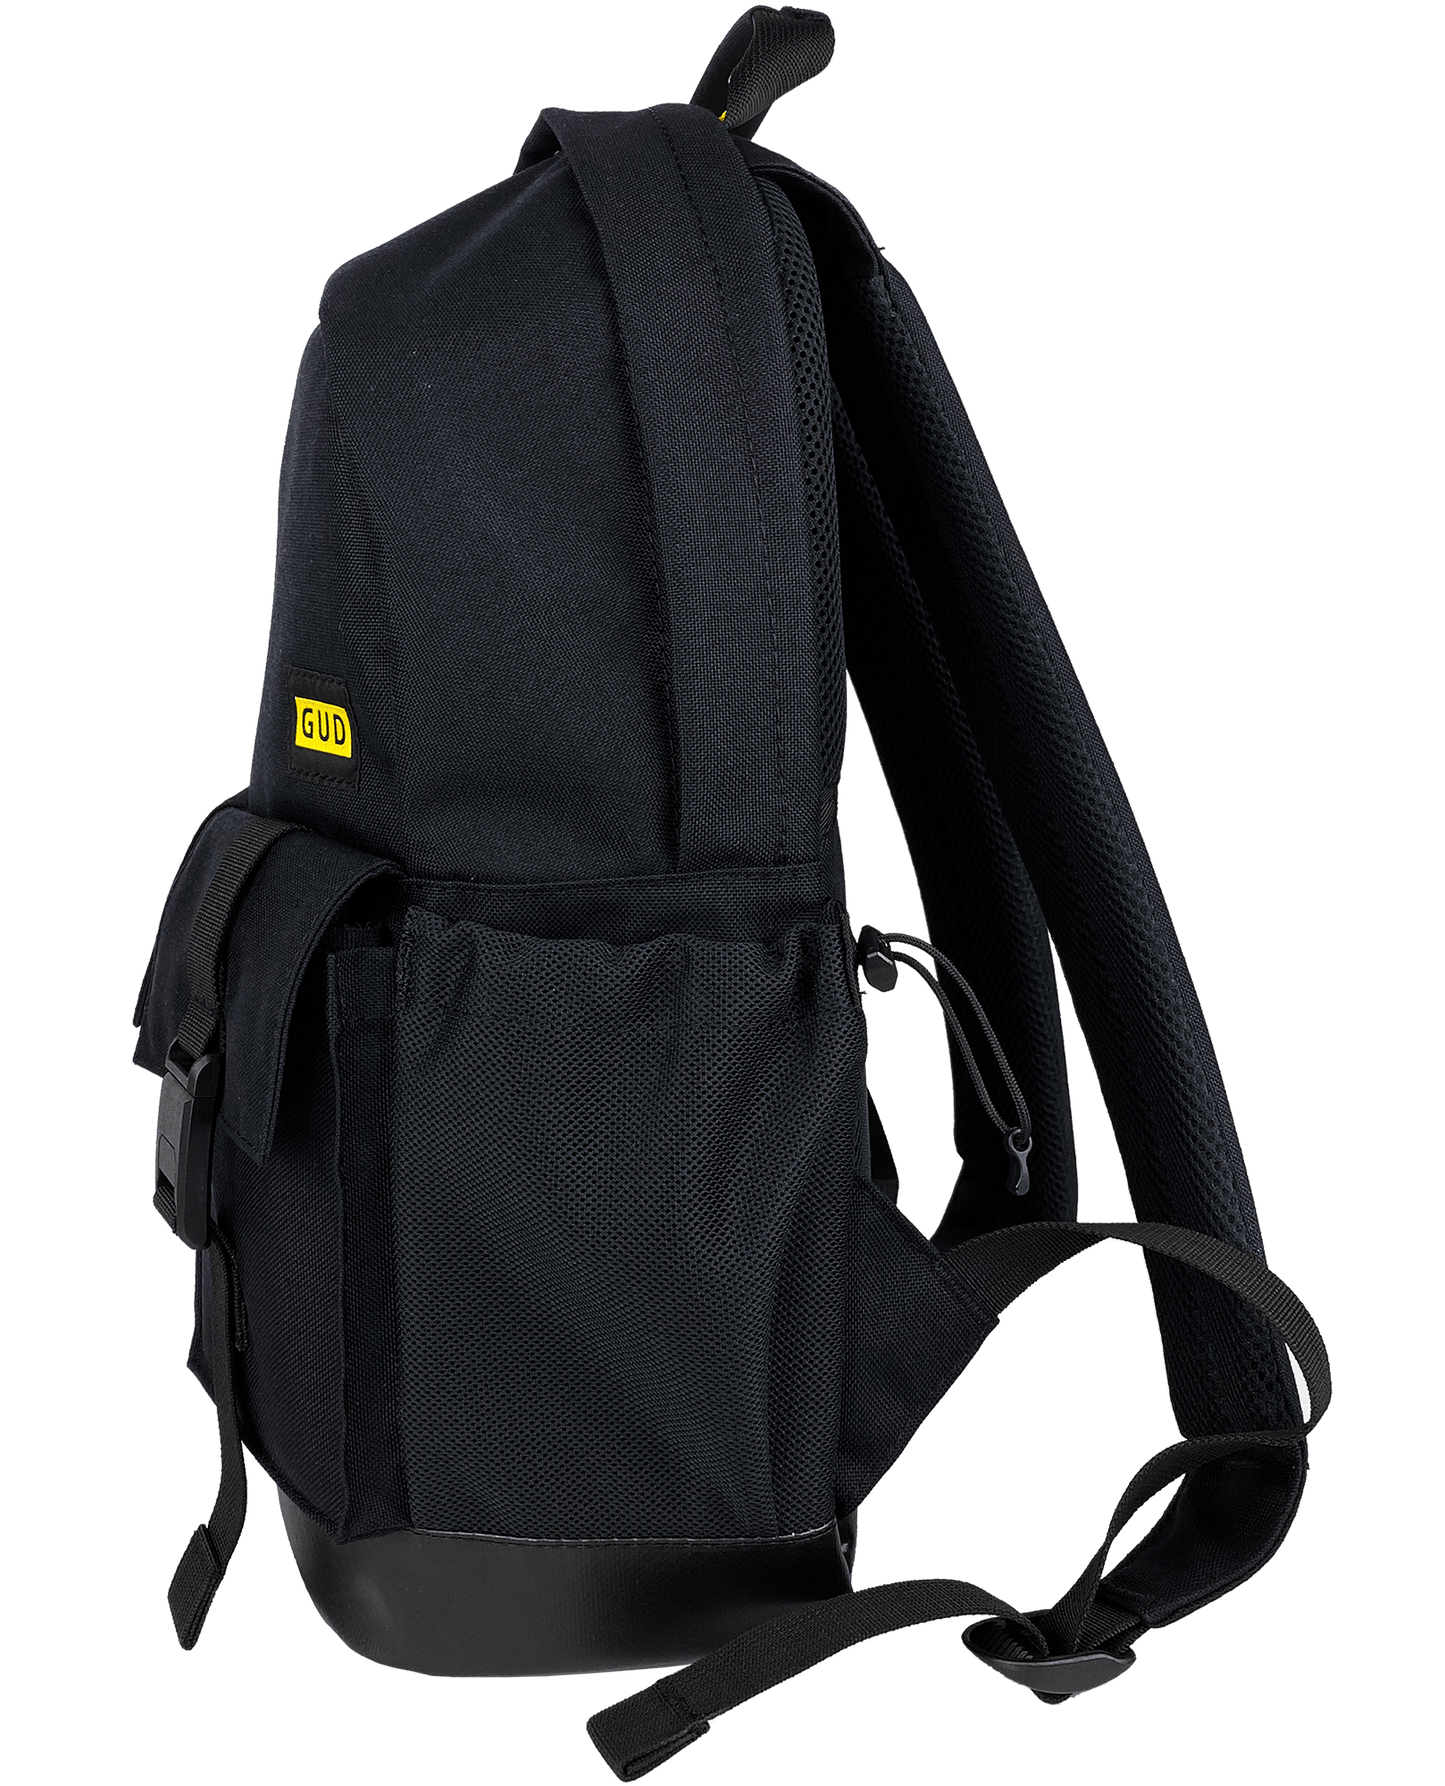 Daypack Backpack by GUD